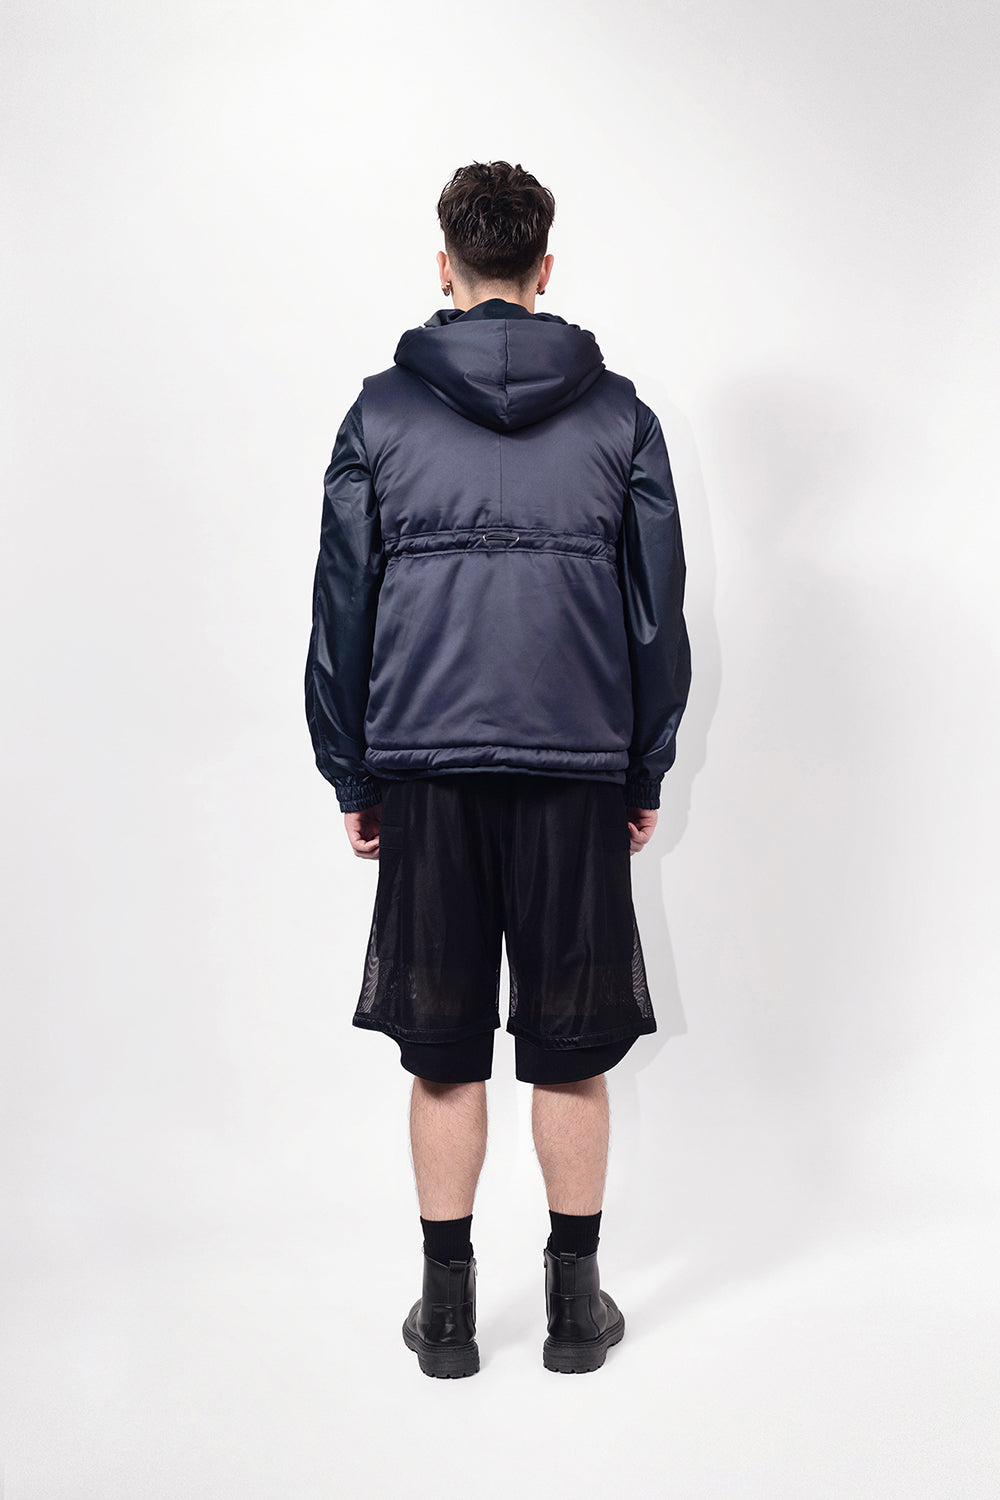 SEANNUNG - MEN - Circle Patch Pocket Sleeveless Jacket in Navy 深藍色圓形口袋鋪棉無袖夾克